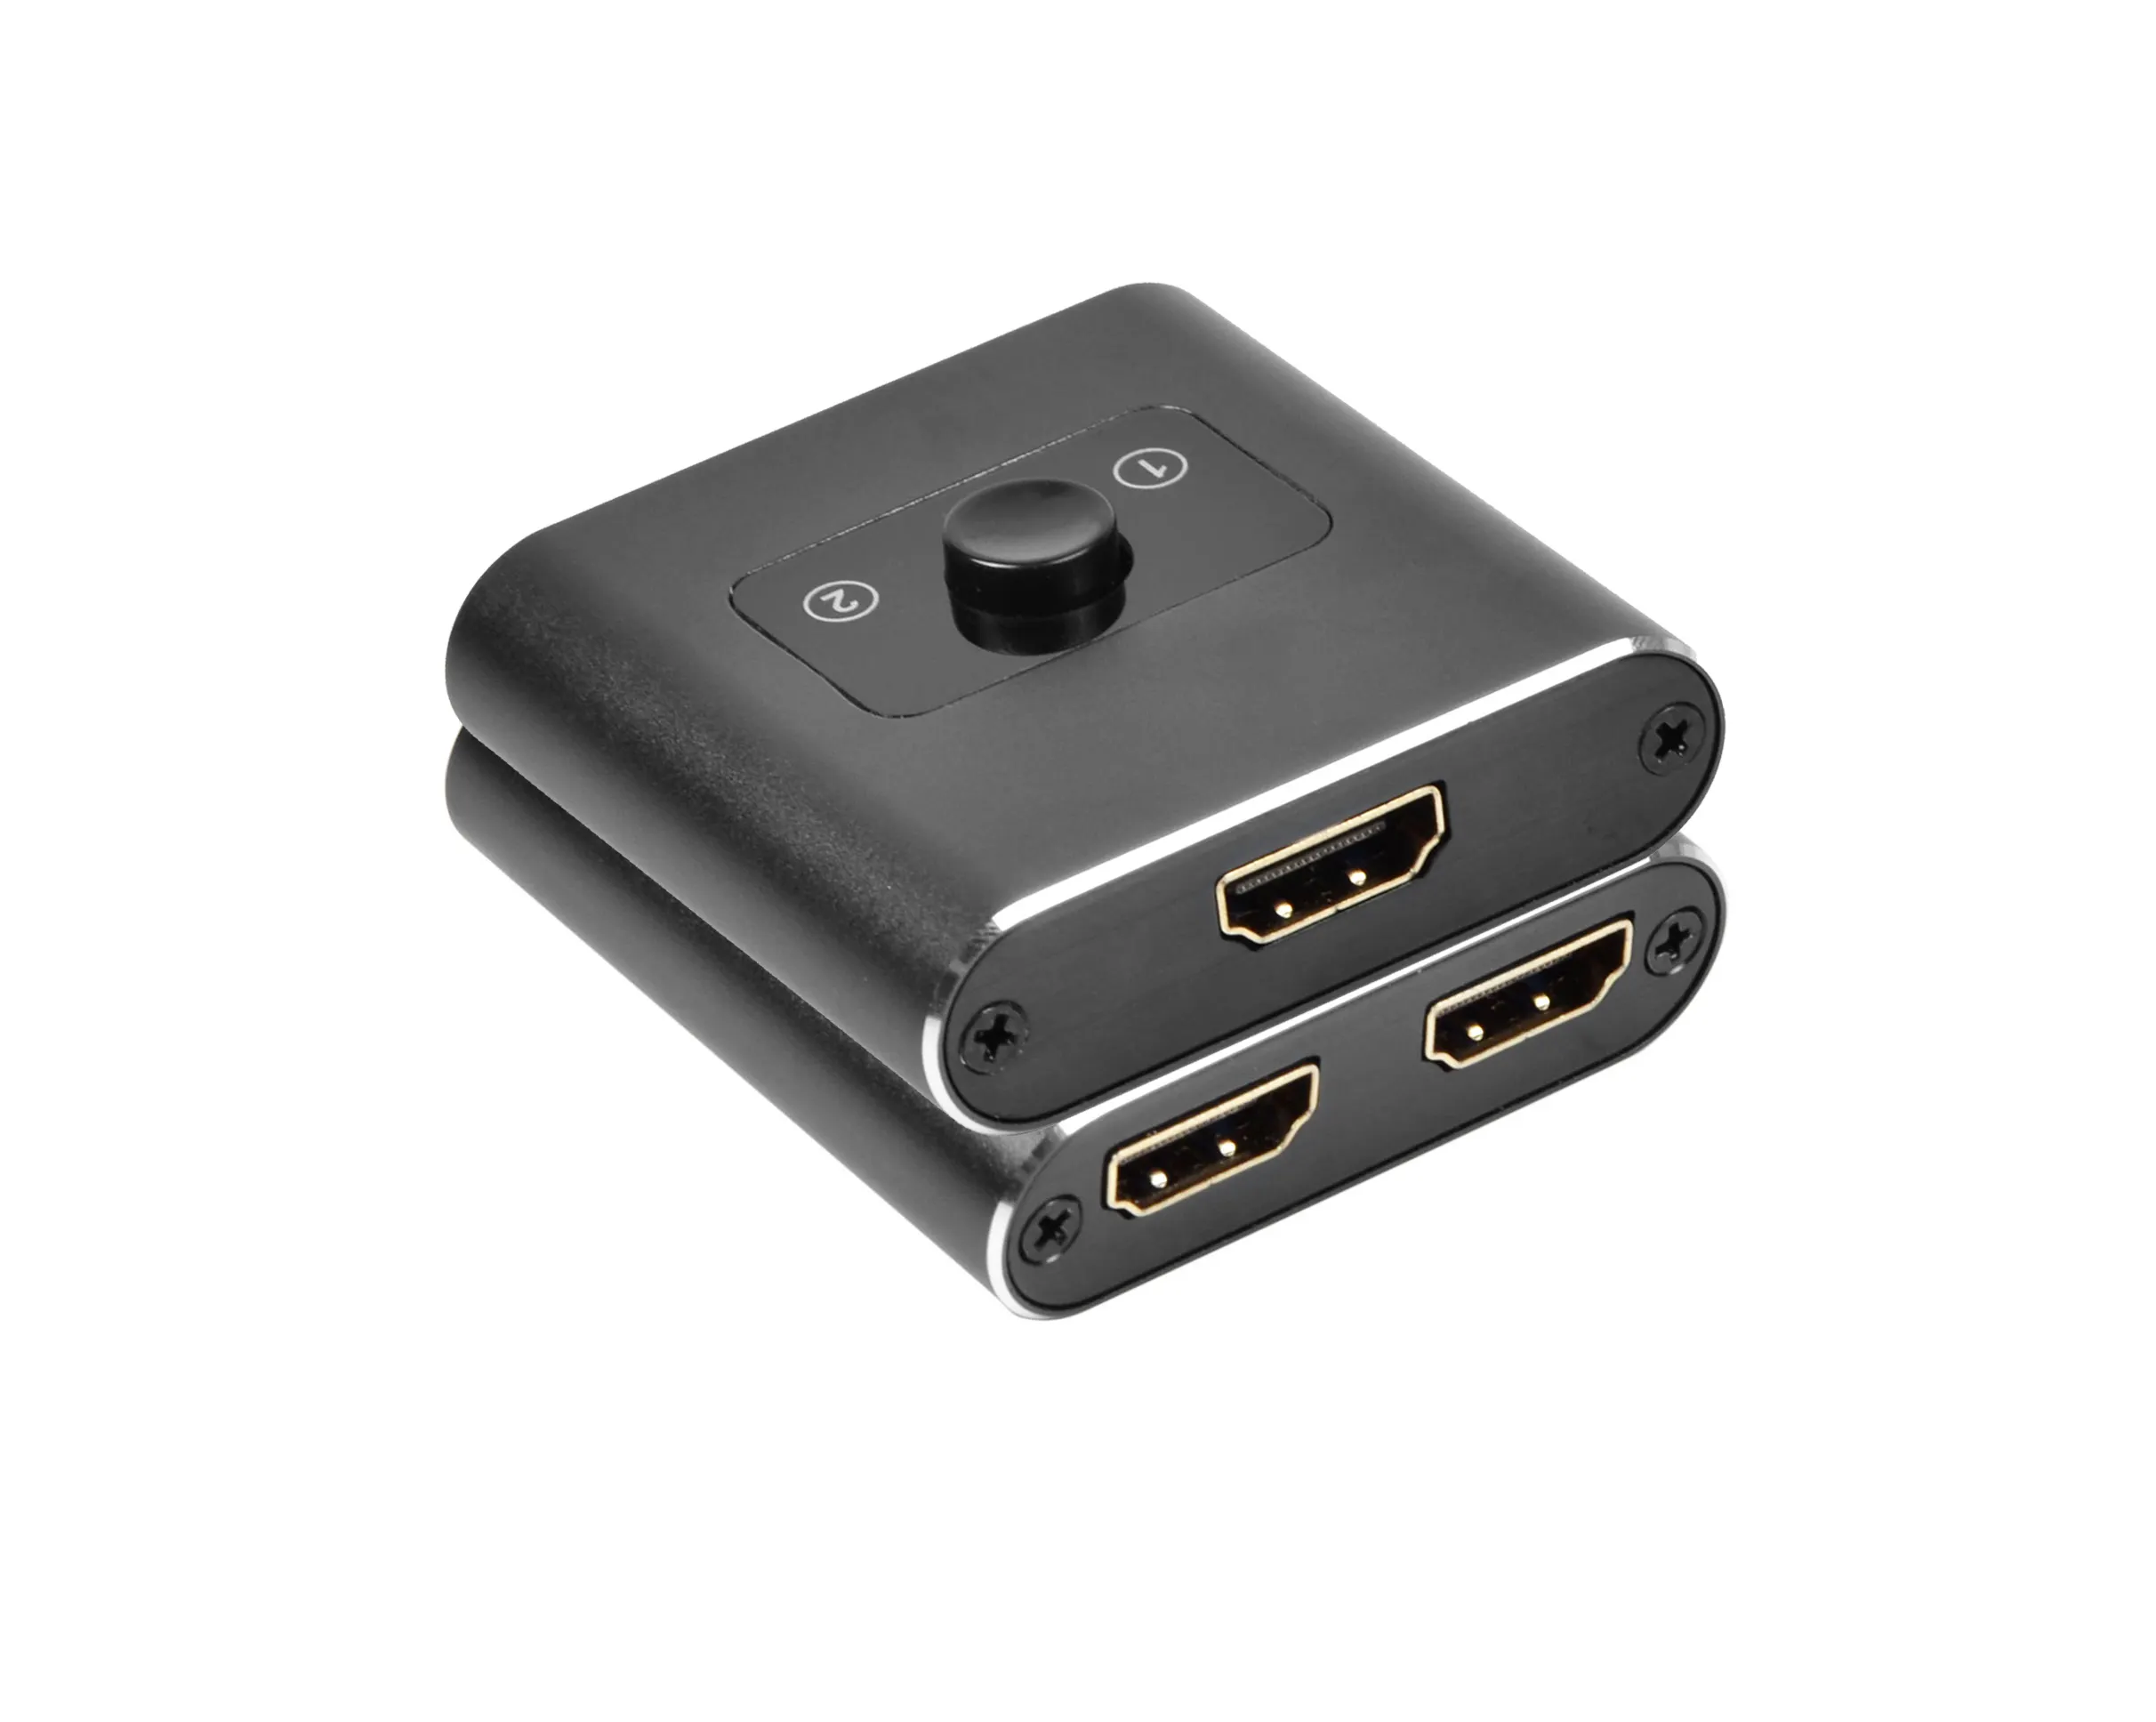 GMAX 4K 3D 2 To 1 HDMI 2.0 Bi-Direction 2x1 Switch 2 Port 2 In 1 Out HDMI Splitter Switch Bidirectional HDMI 1 In 2 Out